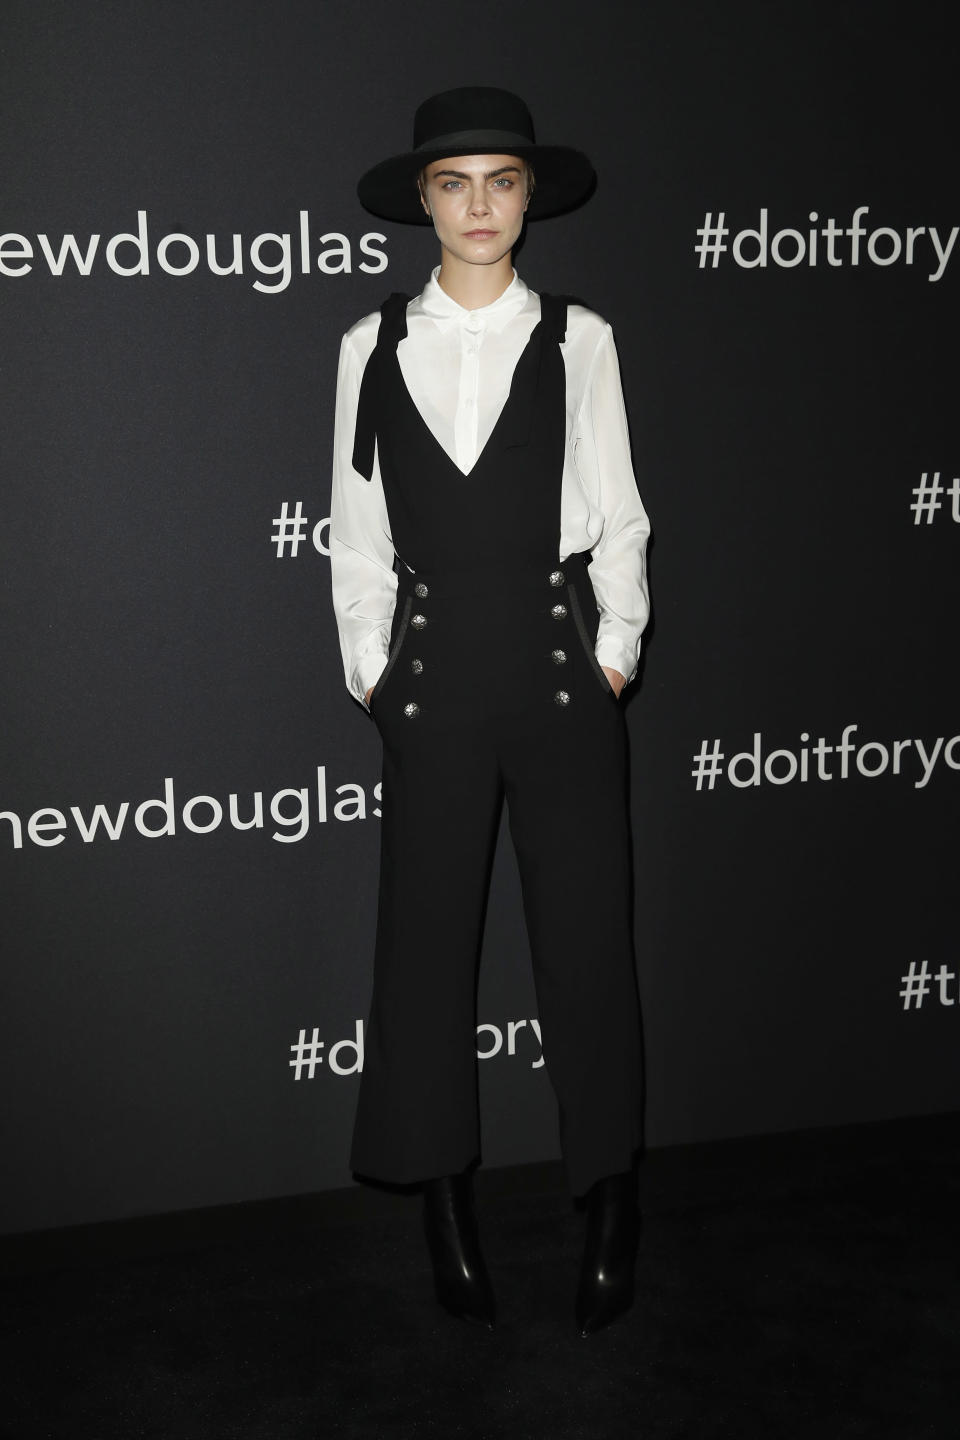 <p>On May 30, Cara Delevigne attended the Douglas X Peter Lindbergh campaign launch in Berlin wearing a black jumpsuit and co-ordinating hat. <em>[Photo: Getty]</em> </p>